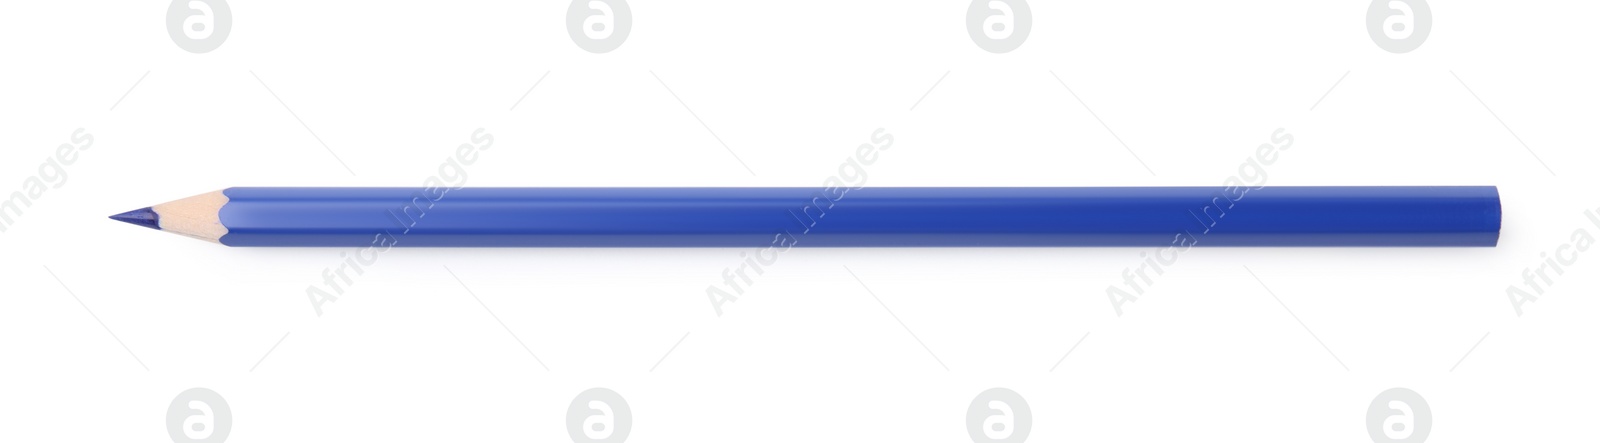 Photo of New blue wooden pencil isolated on white